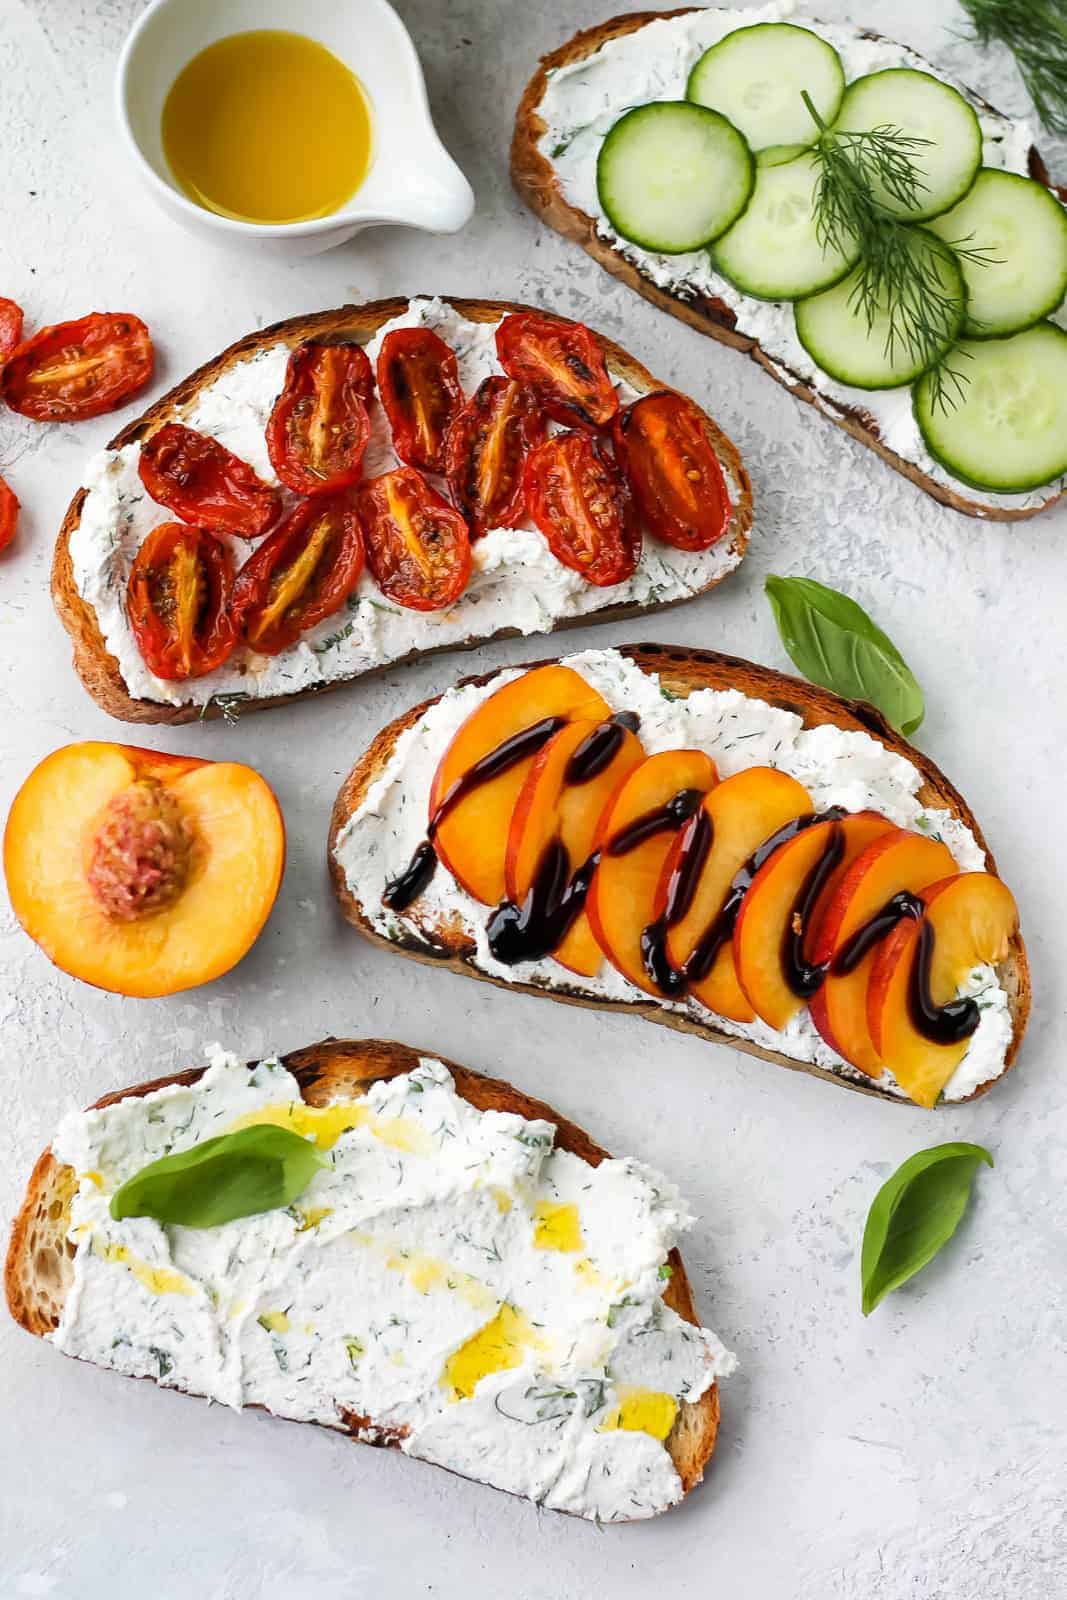 Herbed ricotta toasts.